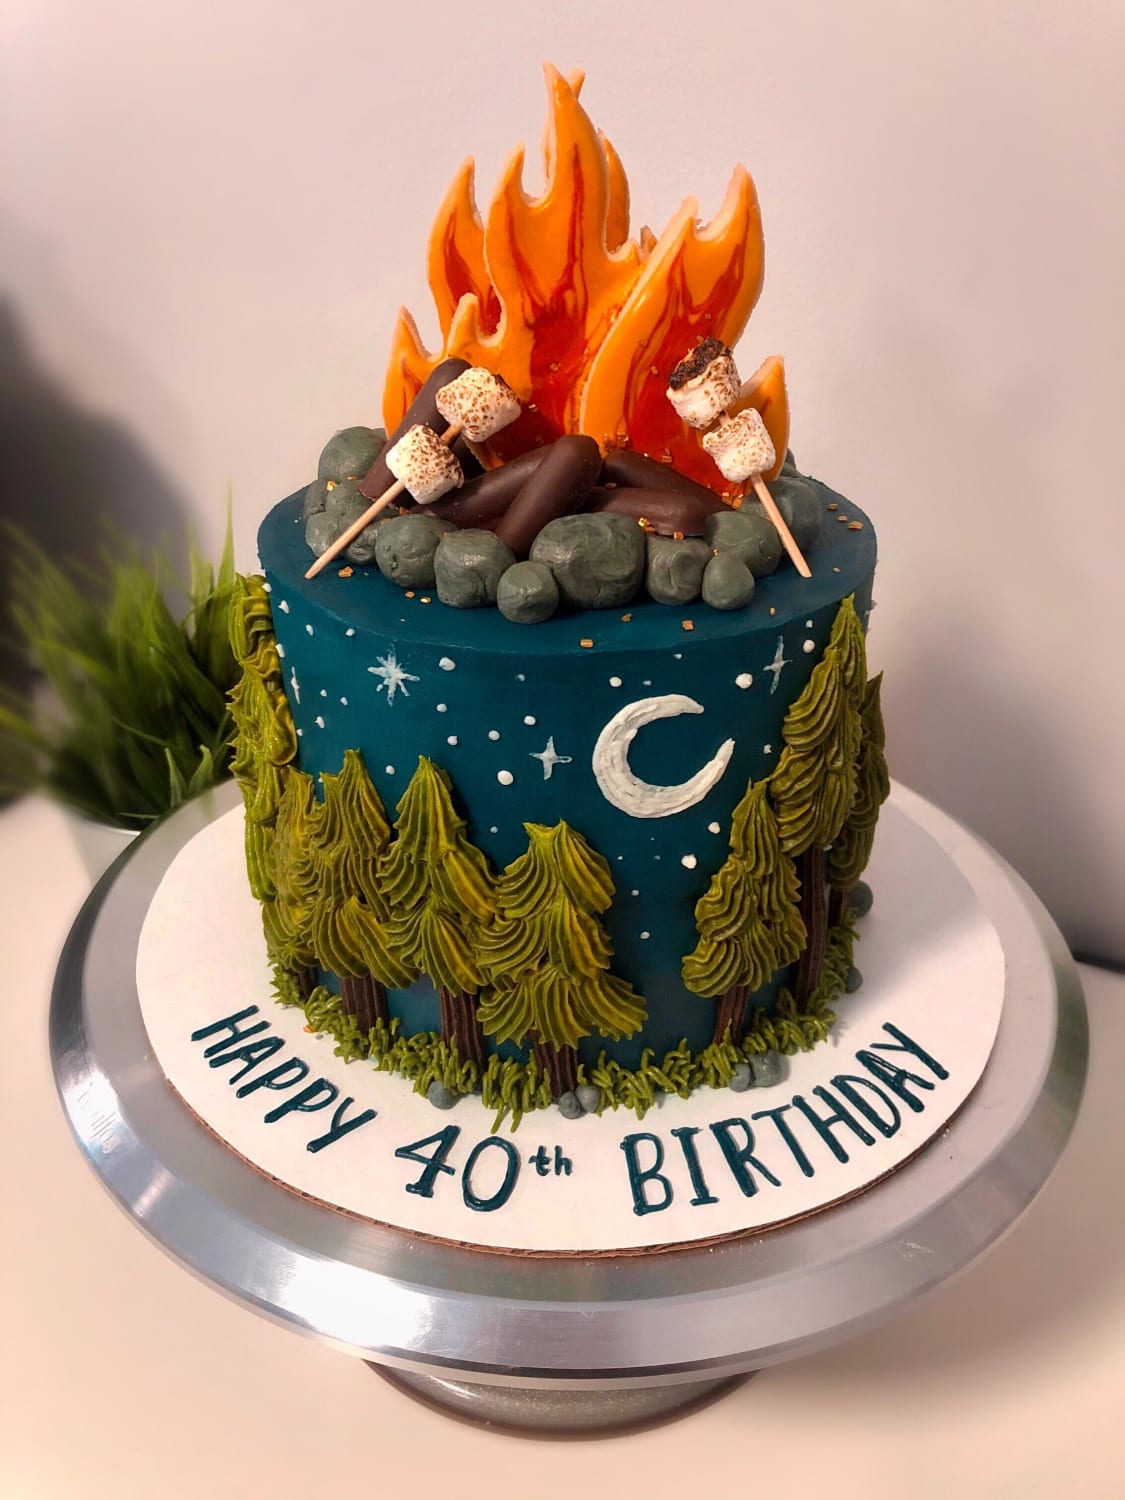 Customer requested a surprise as long as it incorporated a bonfire, I hope they like it!